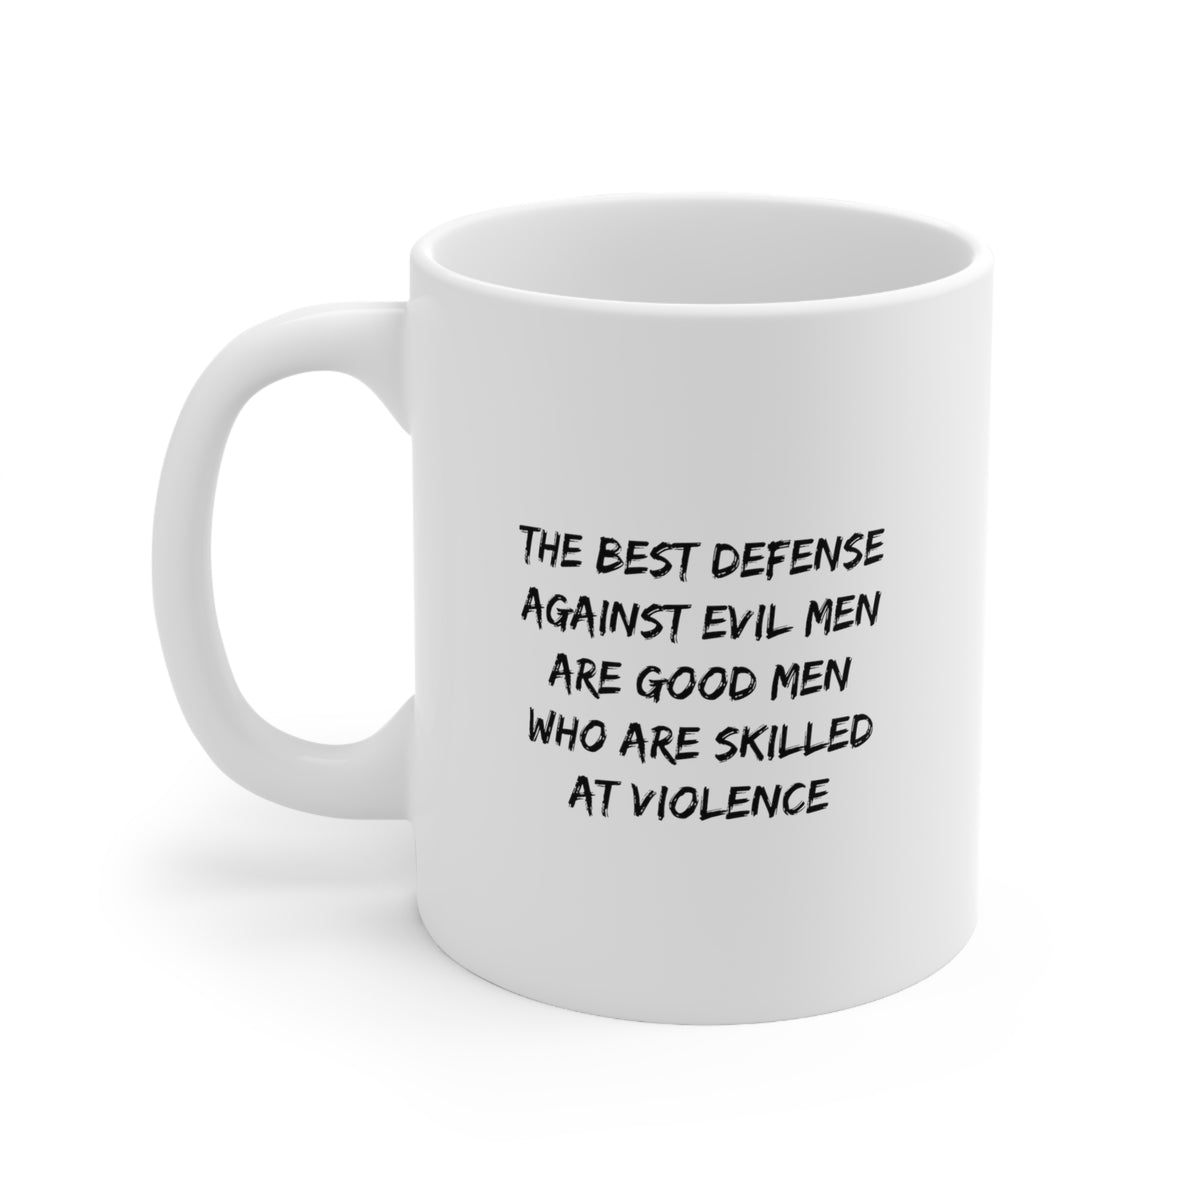 The Best Defense Against Evil Men Are Good Men Who Are Skilled At Violence - Army Veteran White Coffee Mug, Christmas Unique Gifts Tea Cup For Friends